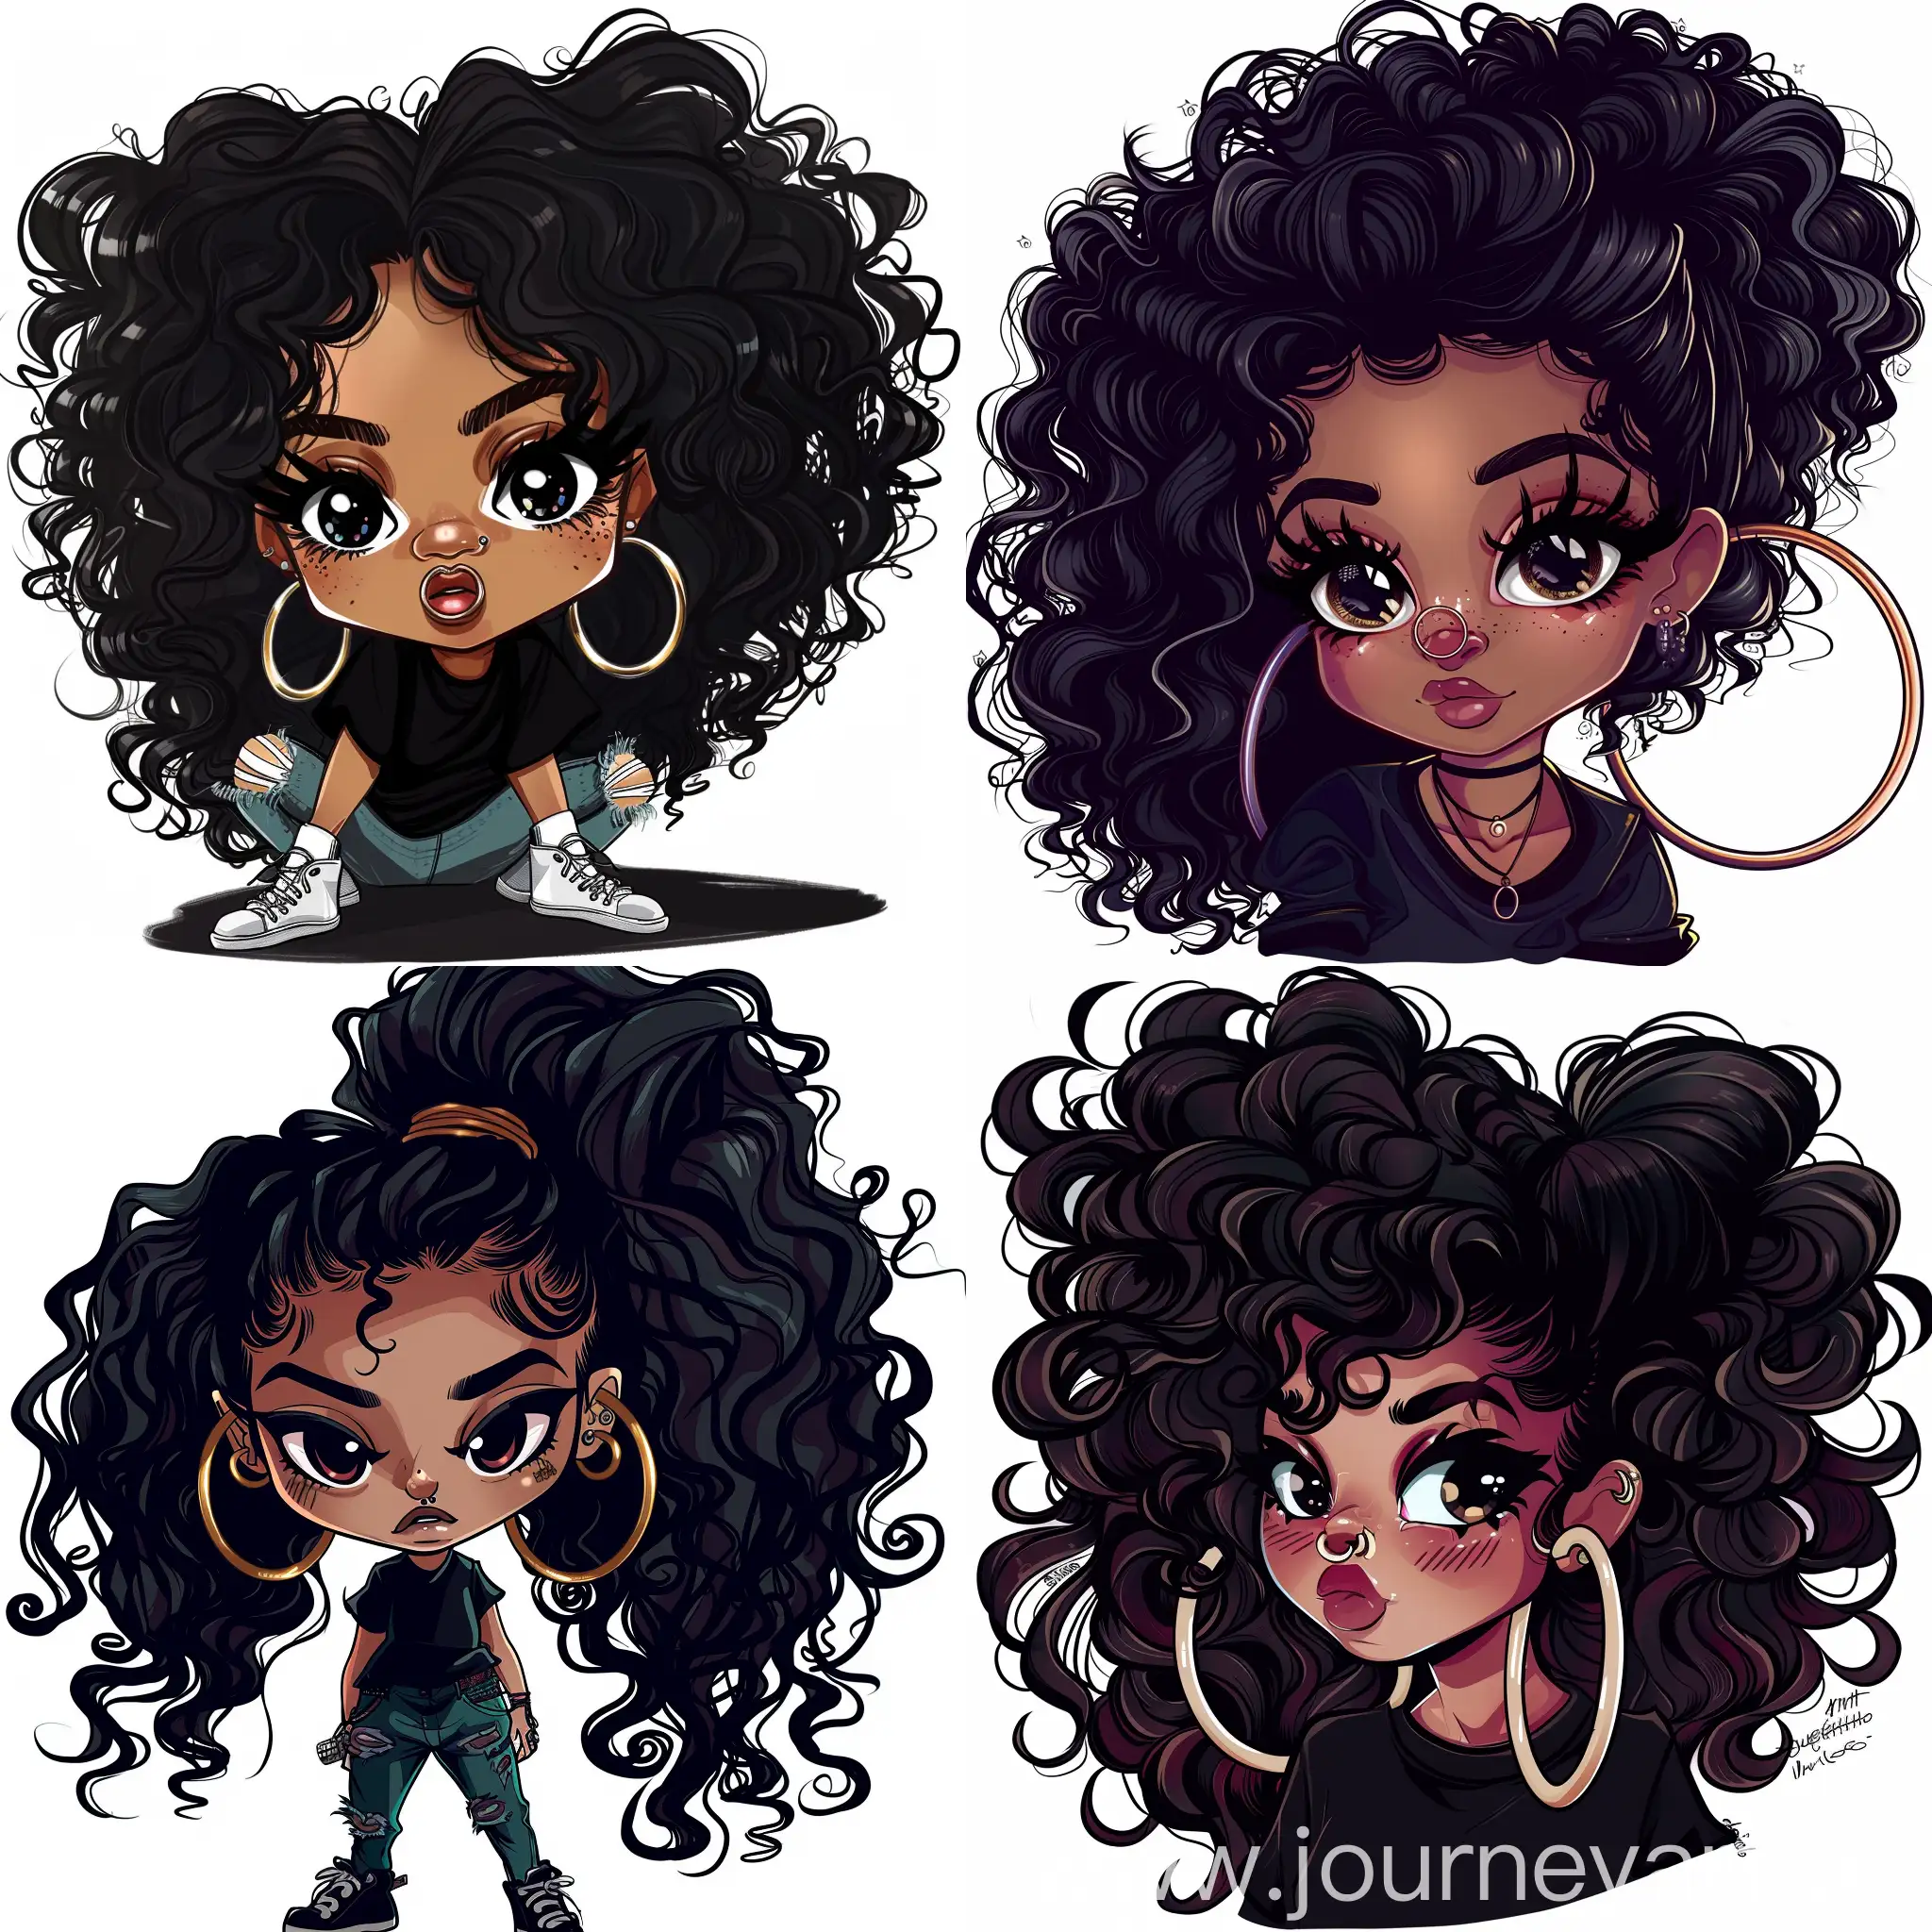 black ebony chibi boho with arfo hair curly with large hoop airings on nose prised llustration of a black girl super hero long hair stickerute black girl with l arfo hair illustration